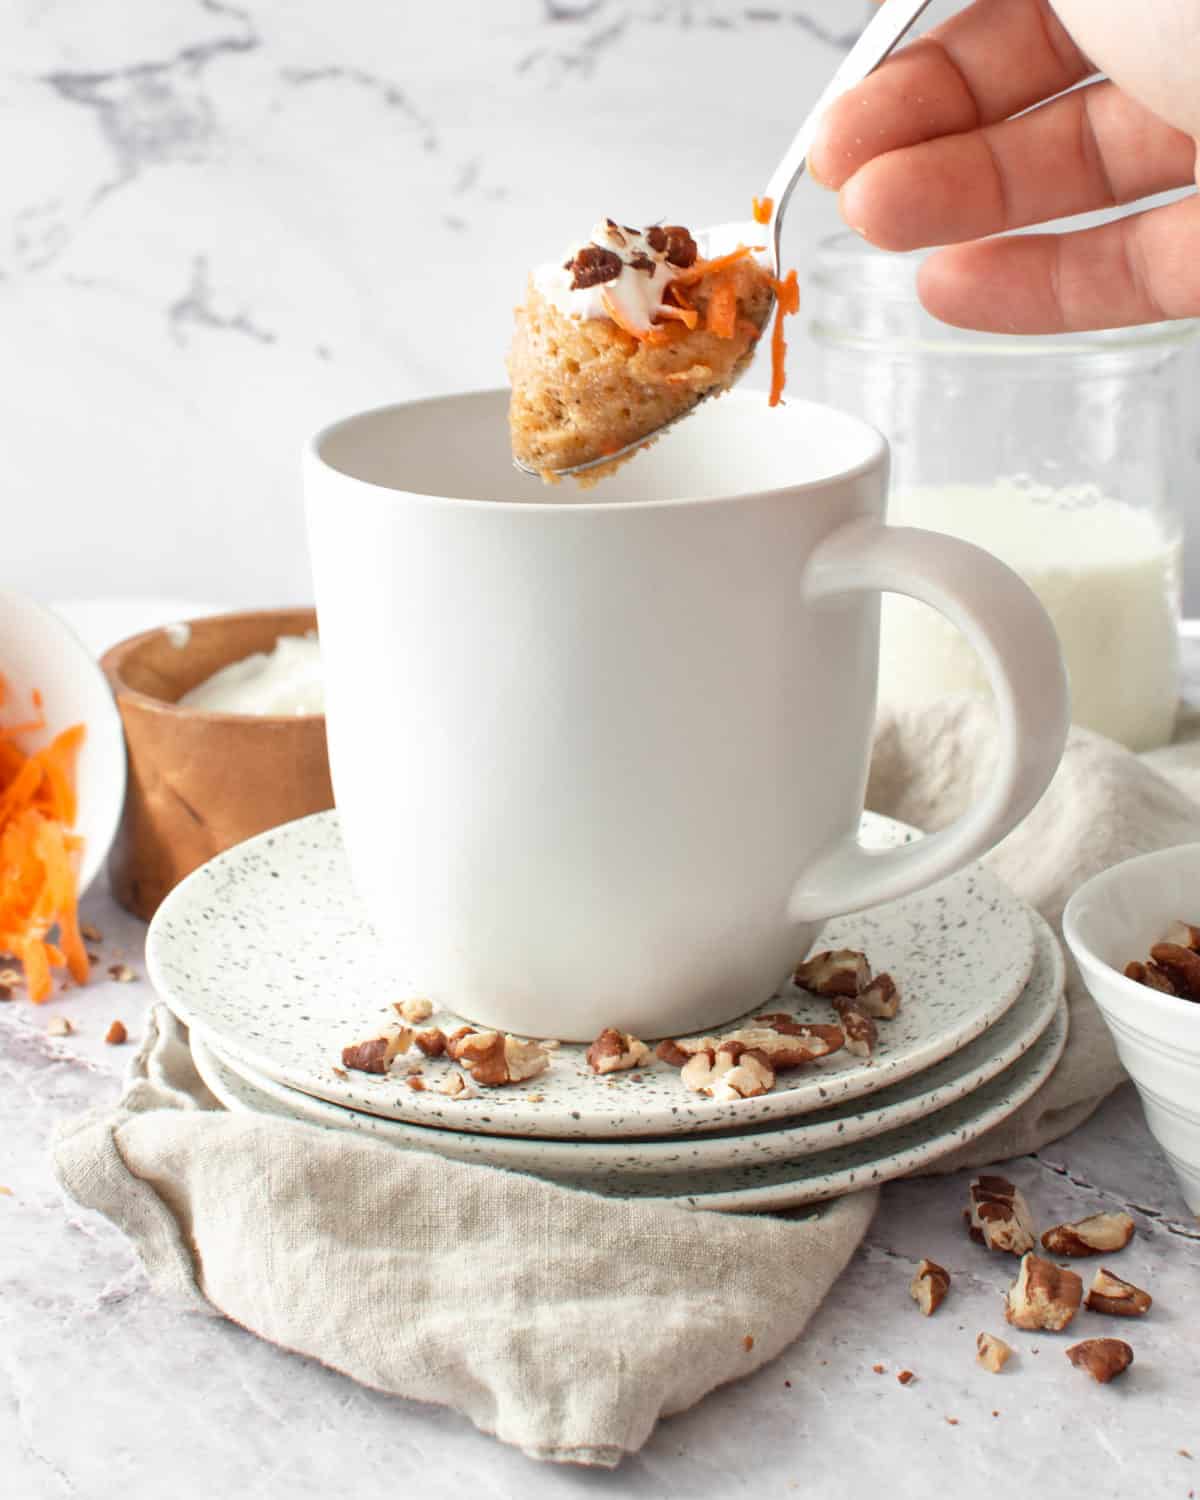 A spoonful of carrot mug cake with almonds.